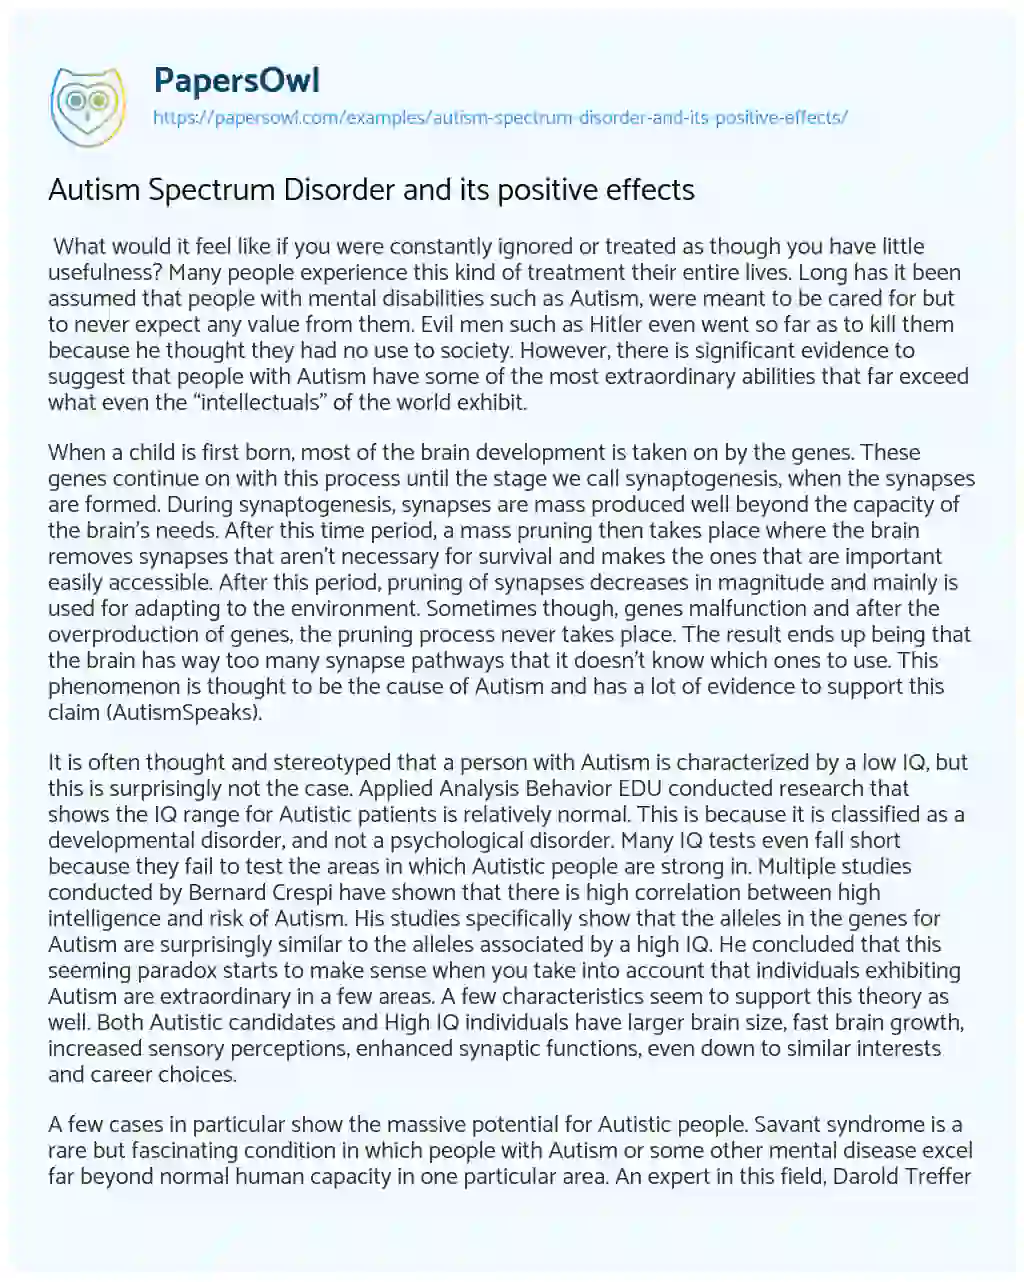 Essay on Autism Spectrum Disorder and its Positive Effects